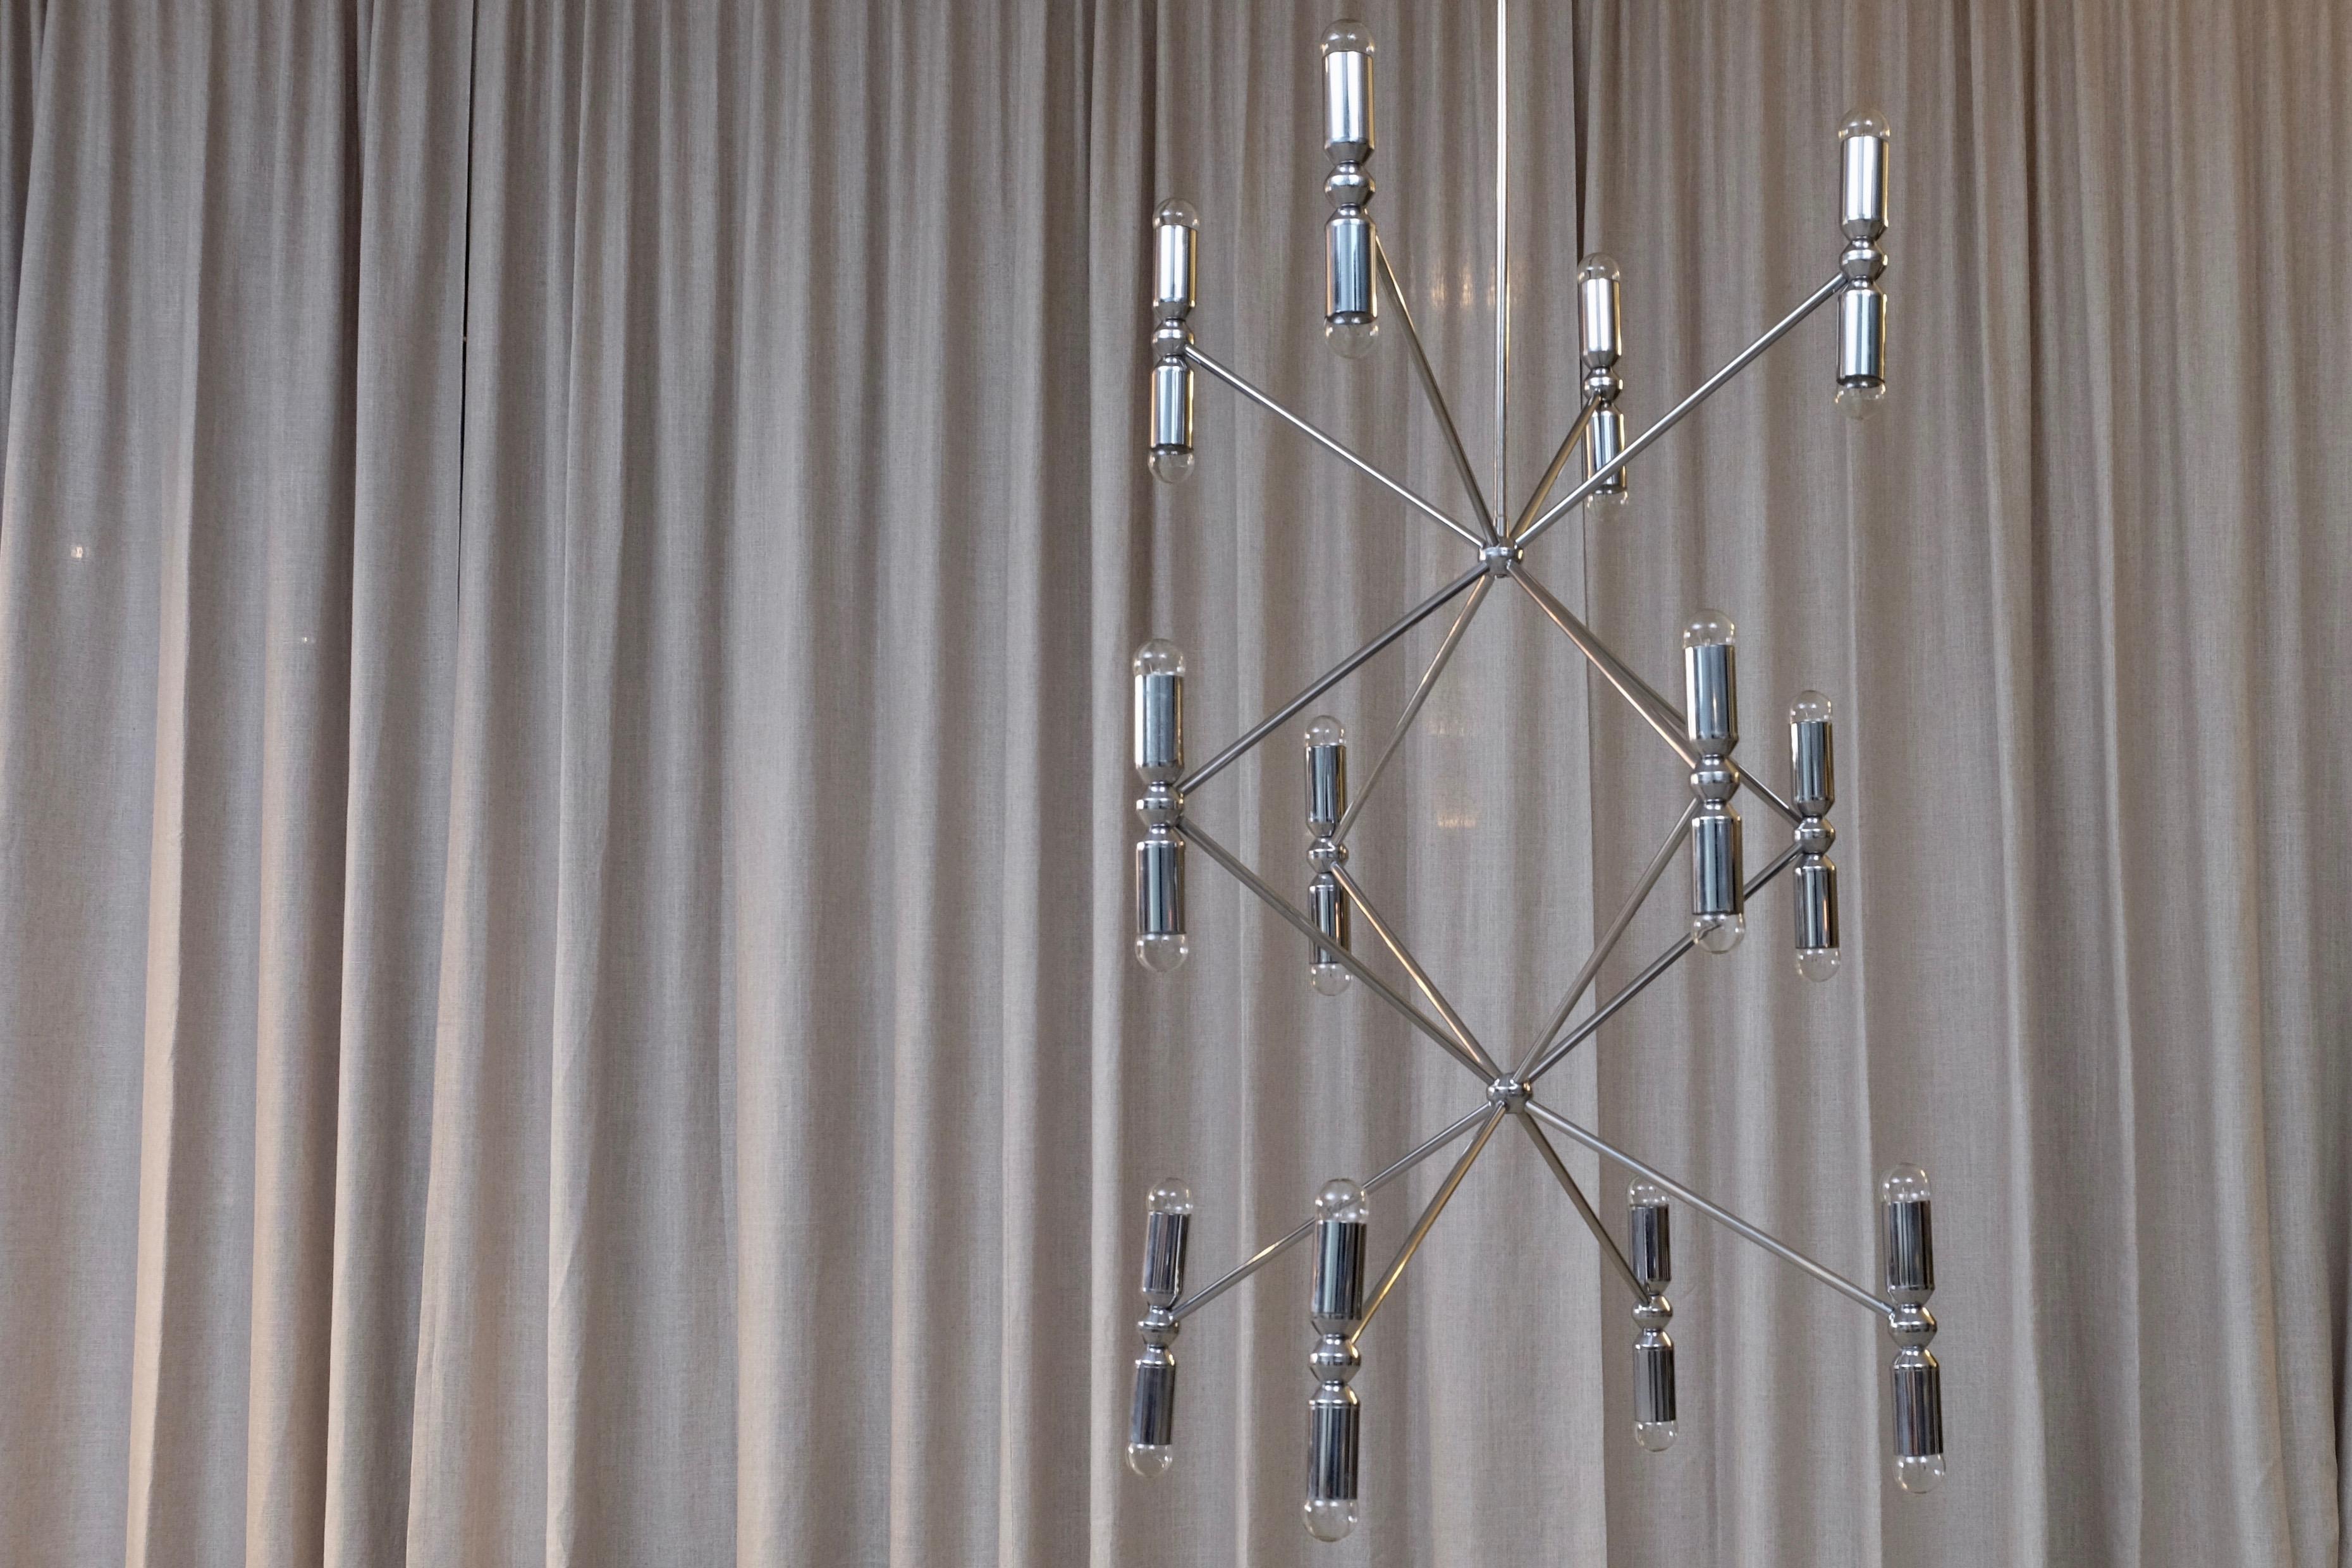 Rare 12-Arm Chandelier with 24 Lights in Chrome, 1970s For Sale 4